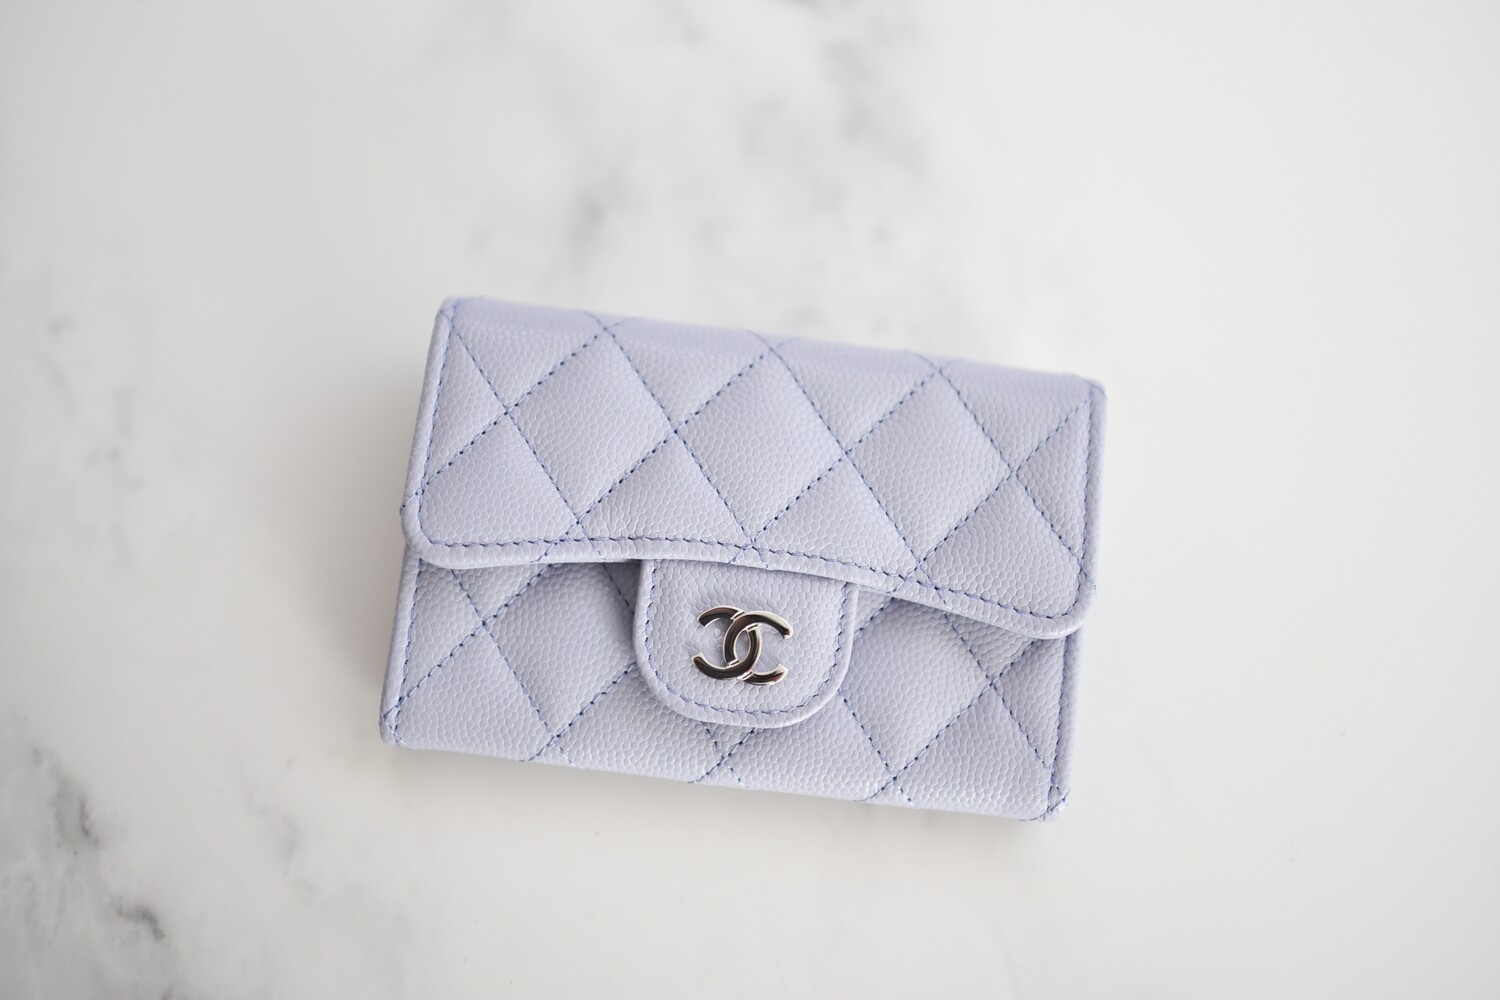 Chanel SLG Snap Card Holder, Lilac Caviar Leather with Silver